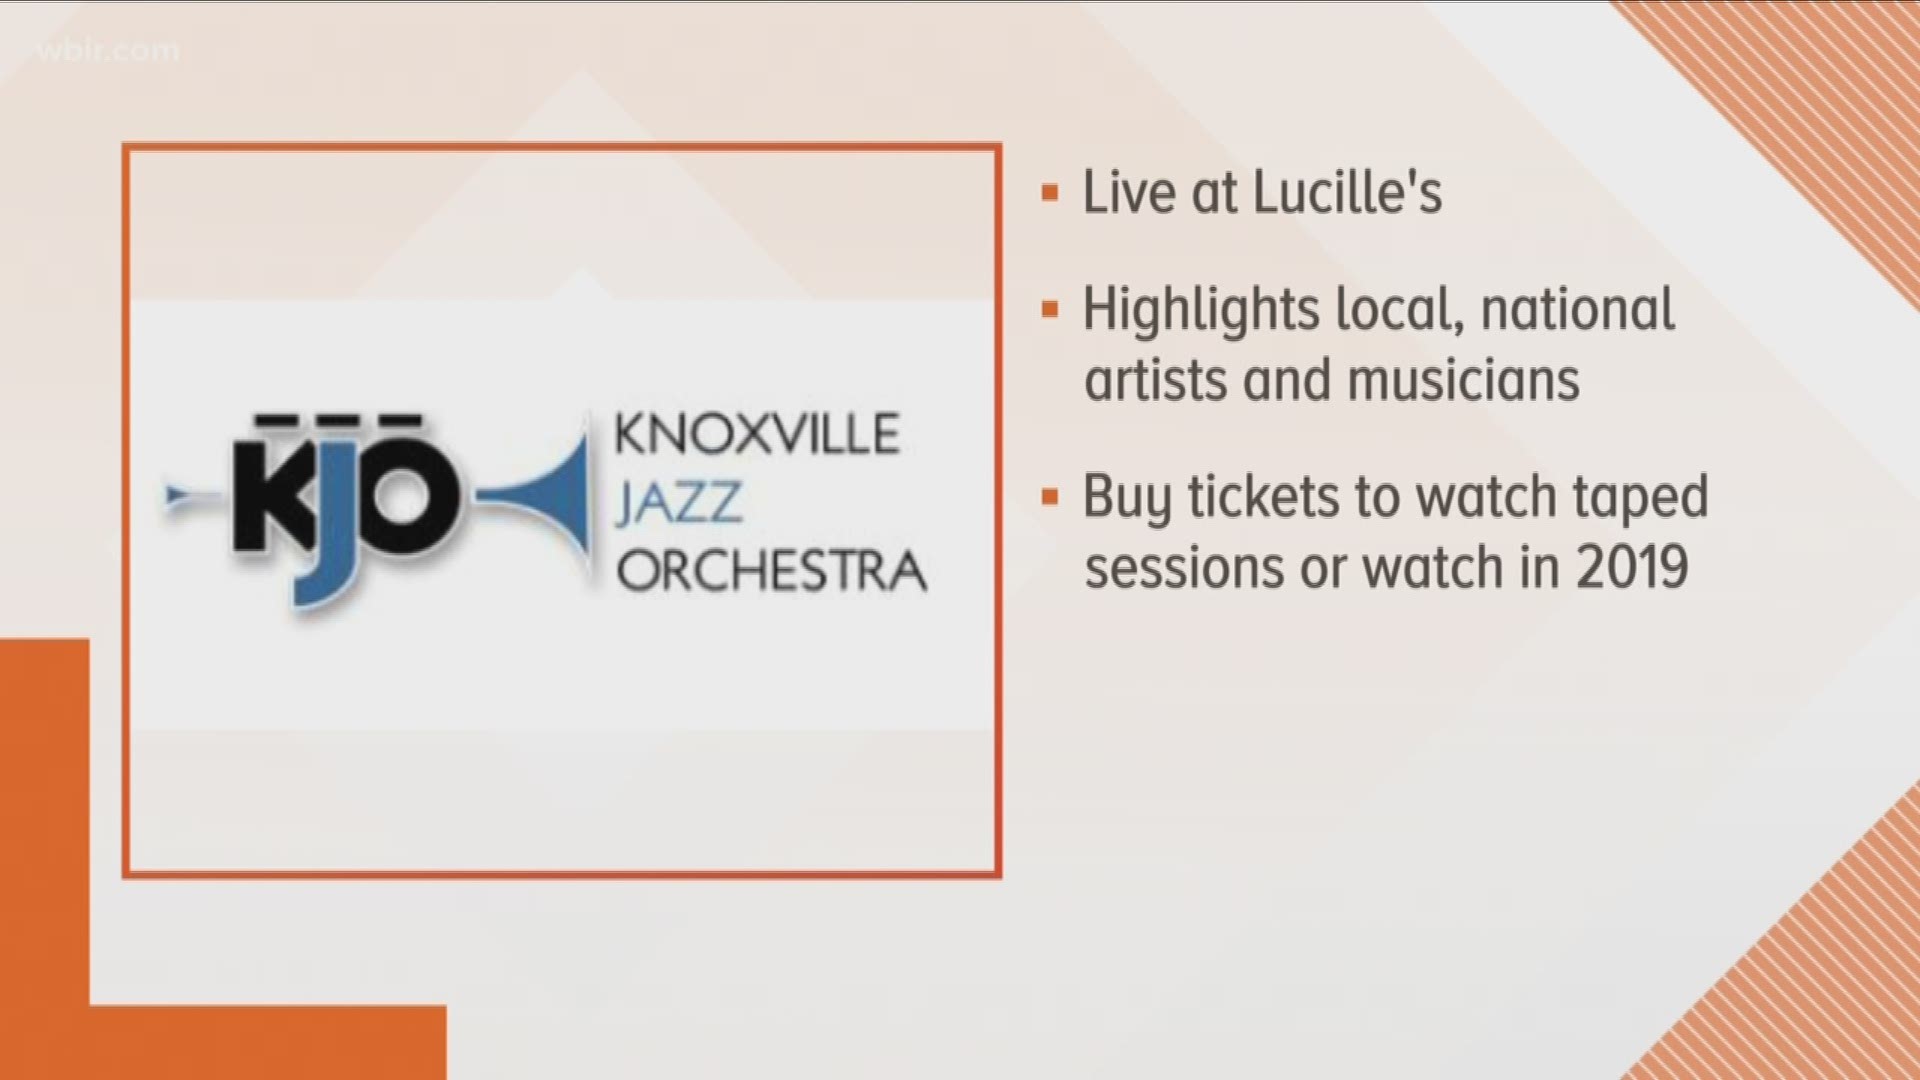 You can get tickets to the taped sessions of "Live at Lucille's," or look out for the show next year!